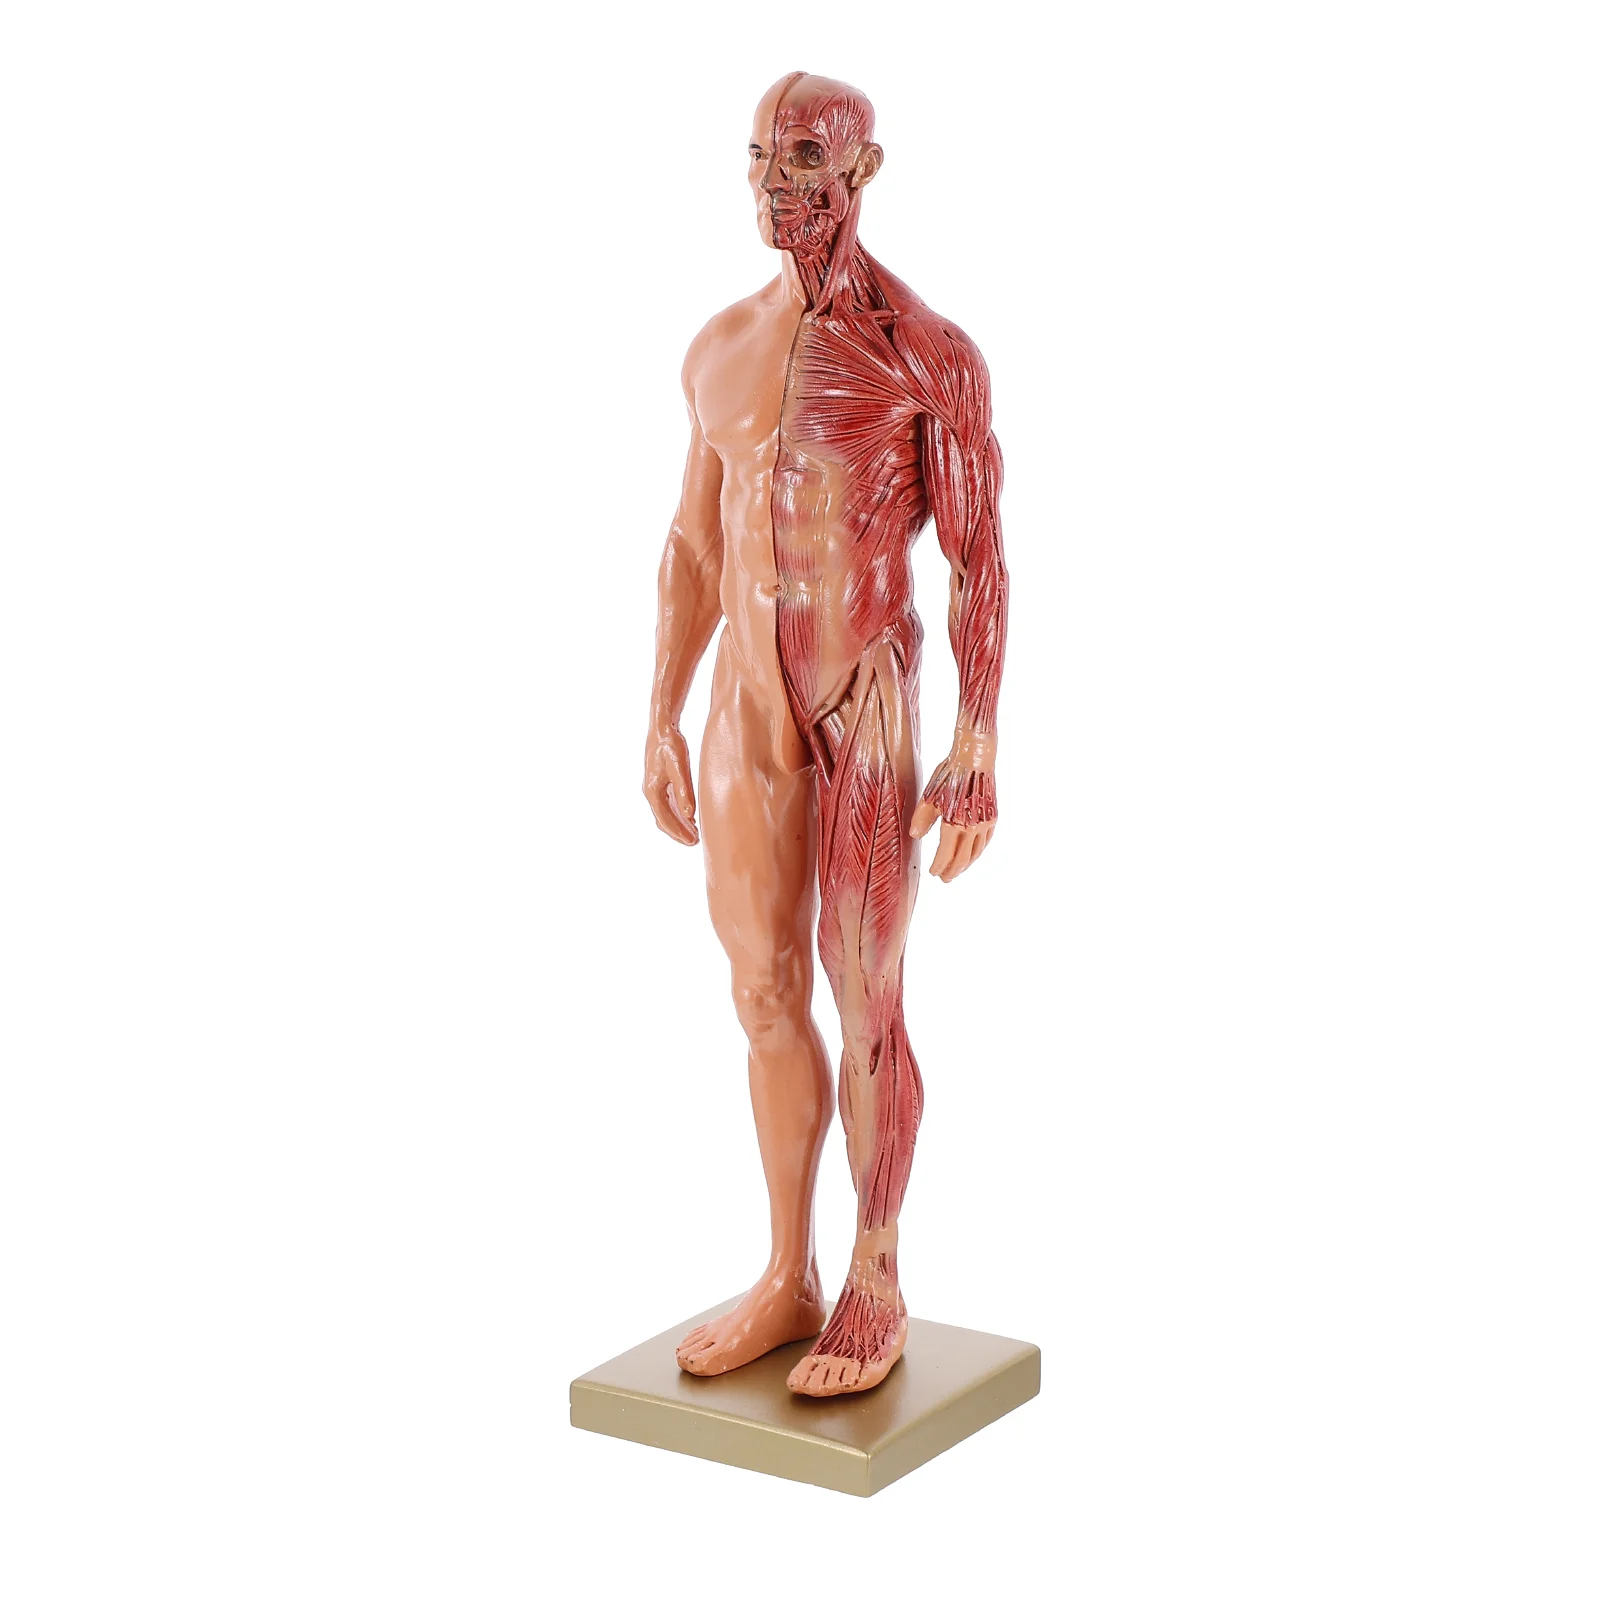 

Mannequin Muscle Structure Model Anatomy Study Tool CG Painting Sculpture Artist Drawing Mini Muscular Human anatomical models